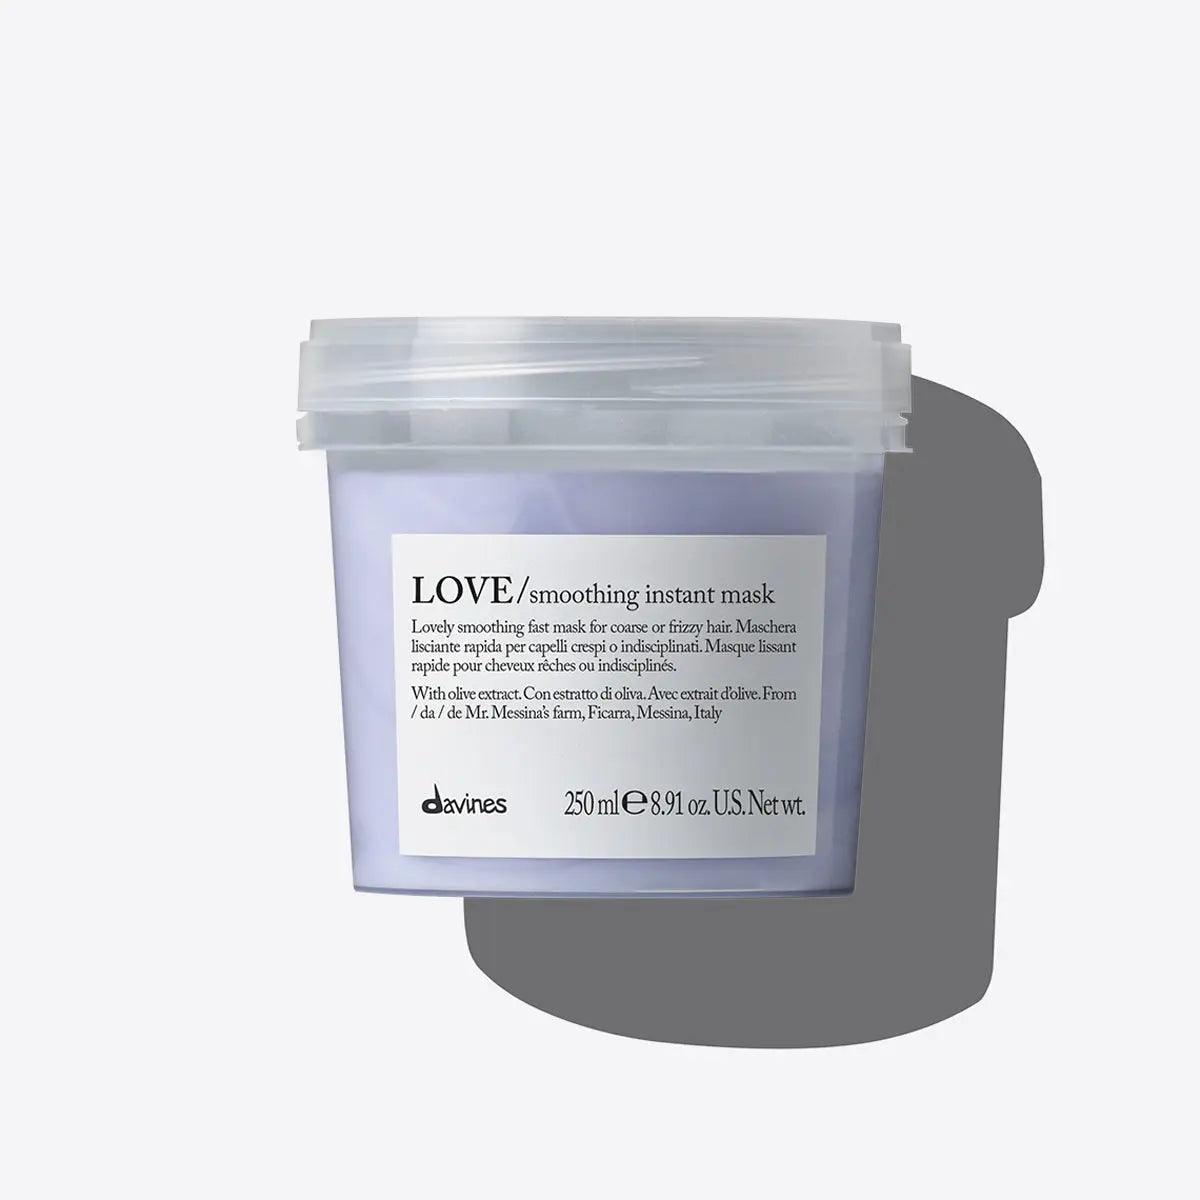 LOVE SMOOTHING INSTANT MASK Davines Boutique Deauville